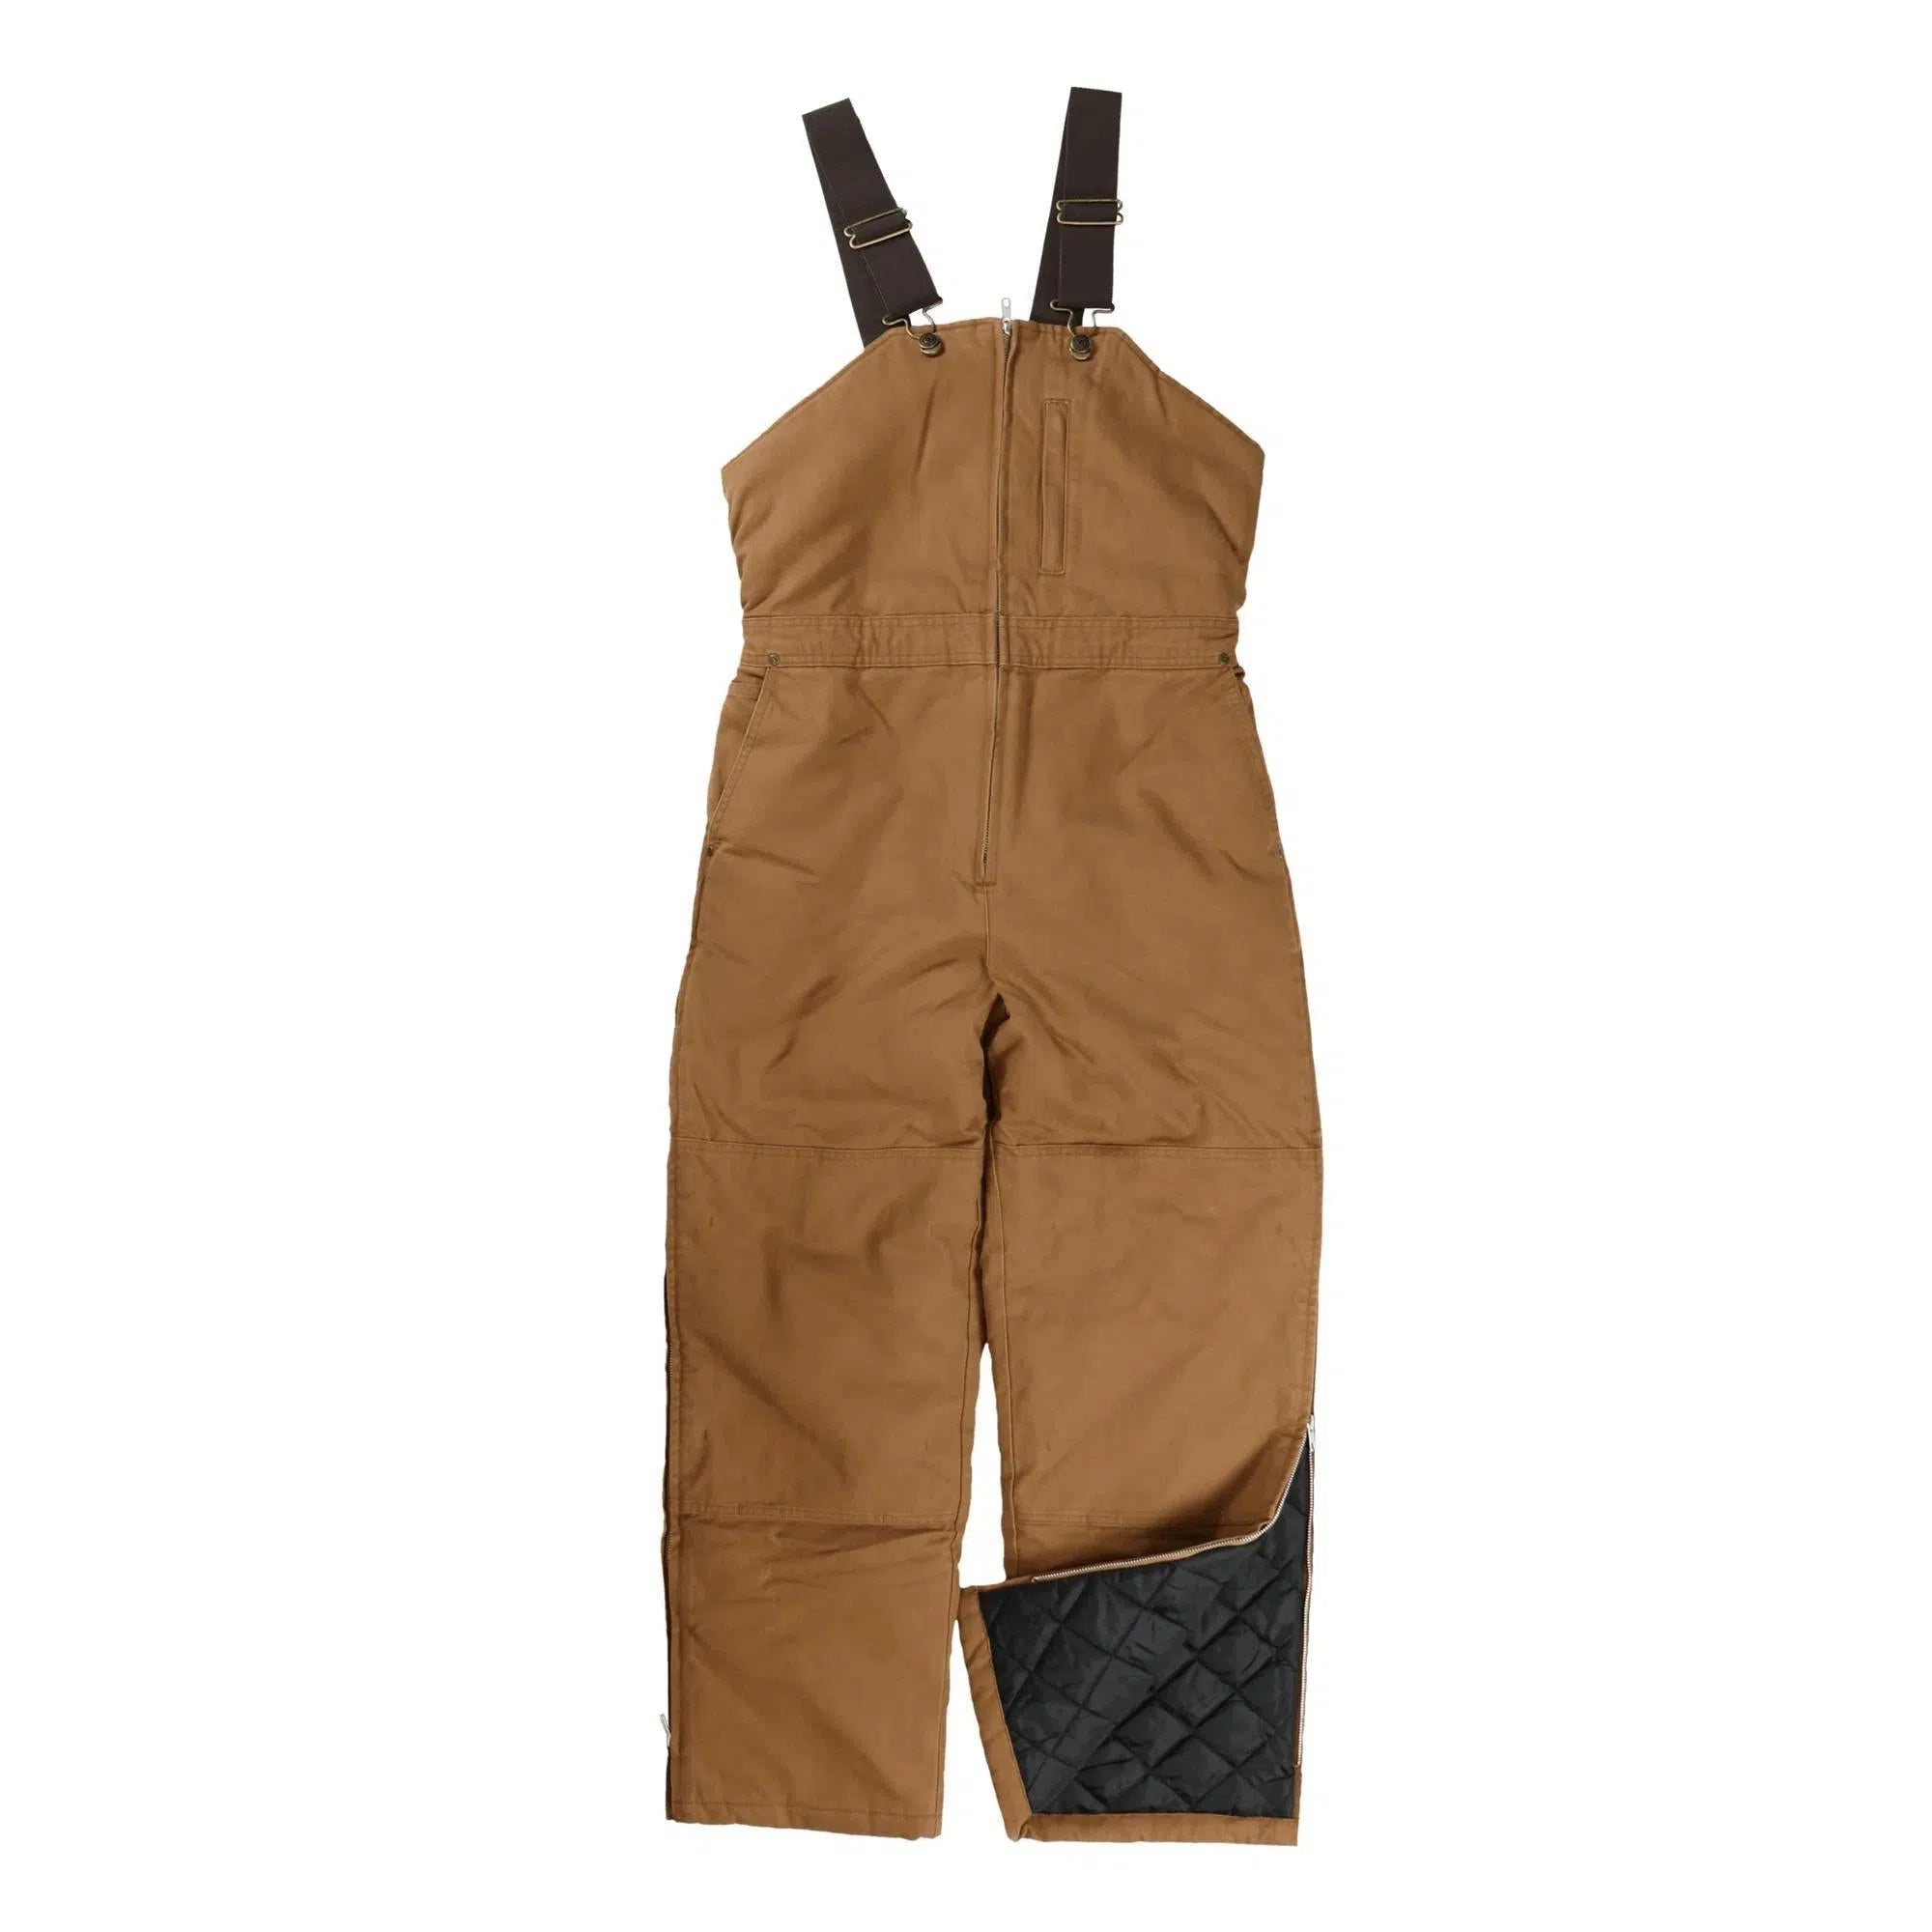 Work King lined overalls (Women's)